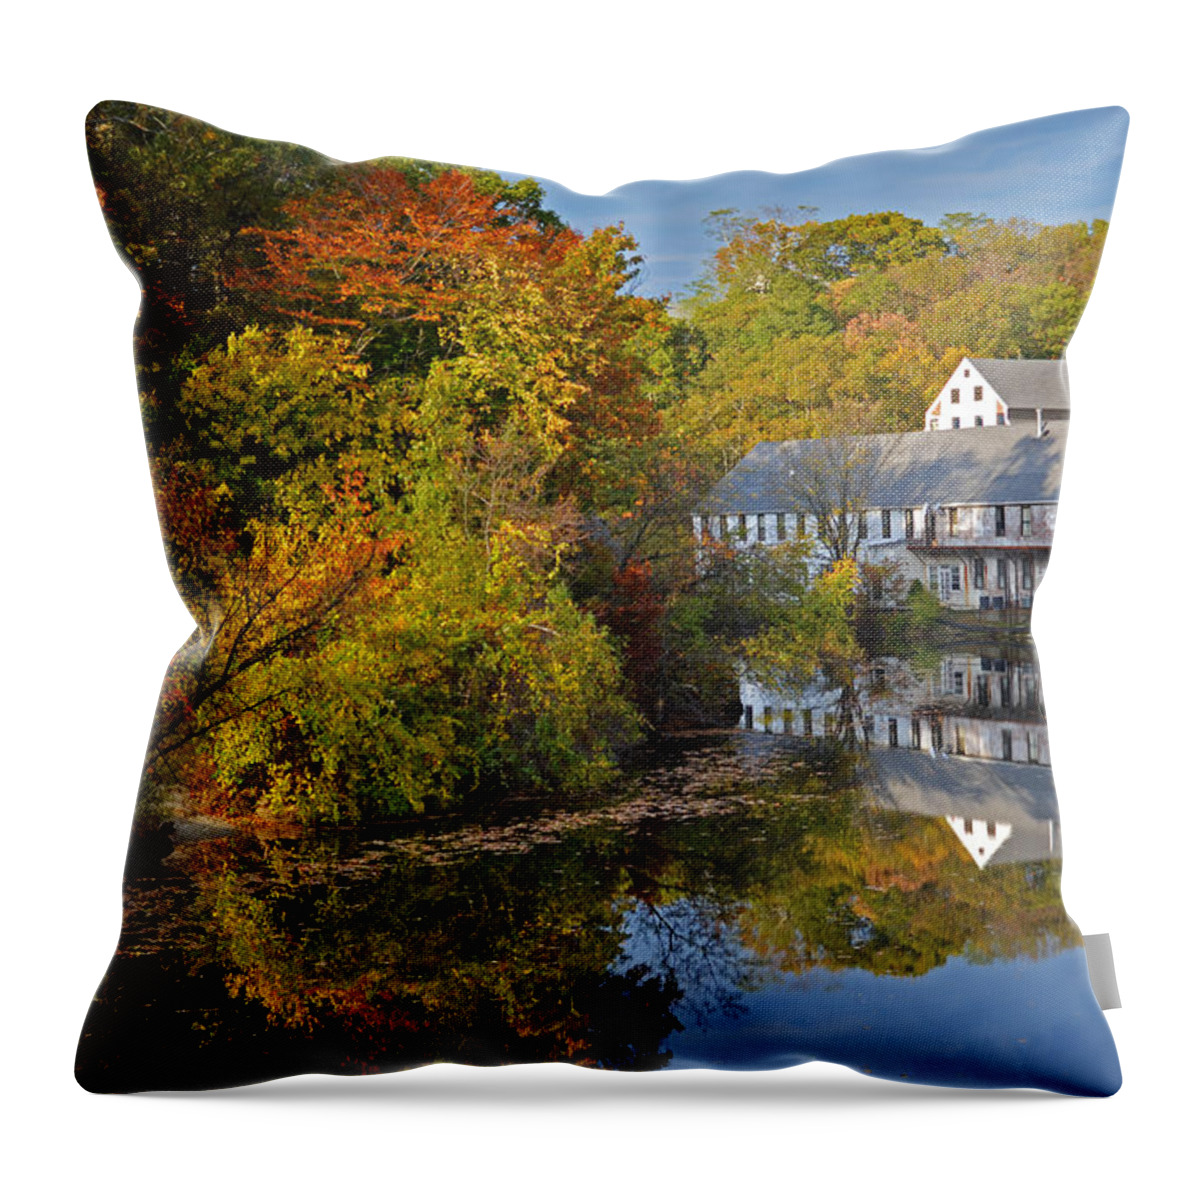 Newton Throw Pillow featuring the photograph New England Autumn Day by Toby McGuire